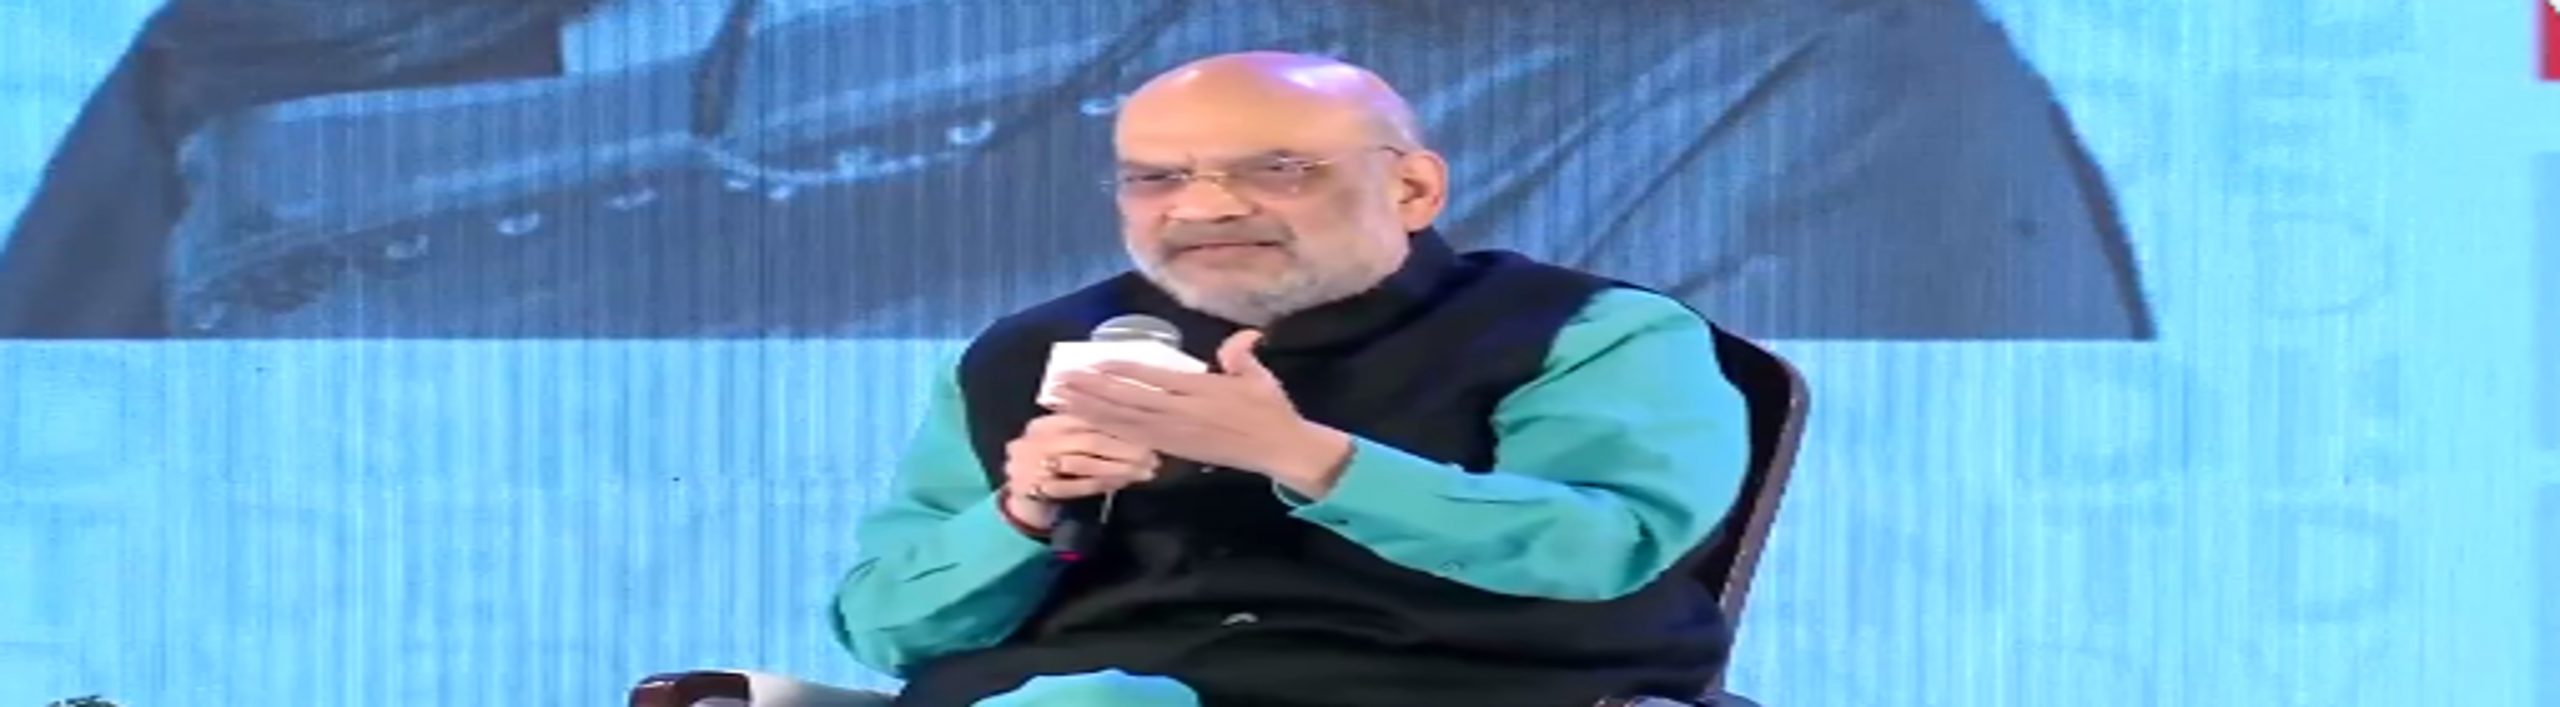 “Rahul Gandhi has a policy to lie publicly repeatedly”: Home Minister Amit Shah tears into Rahul Gandhi for questioning PM Modi’s caste